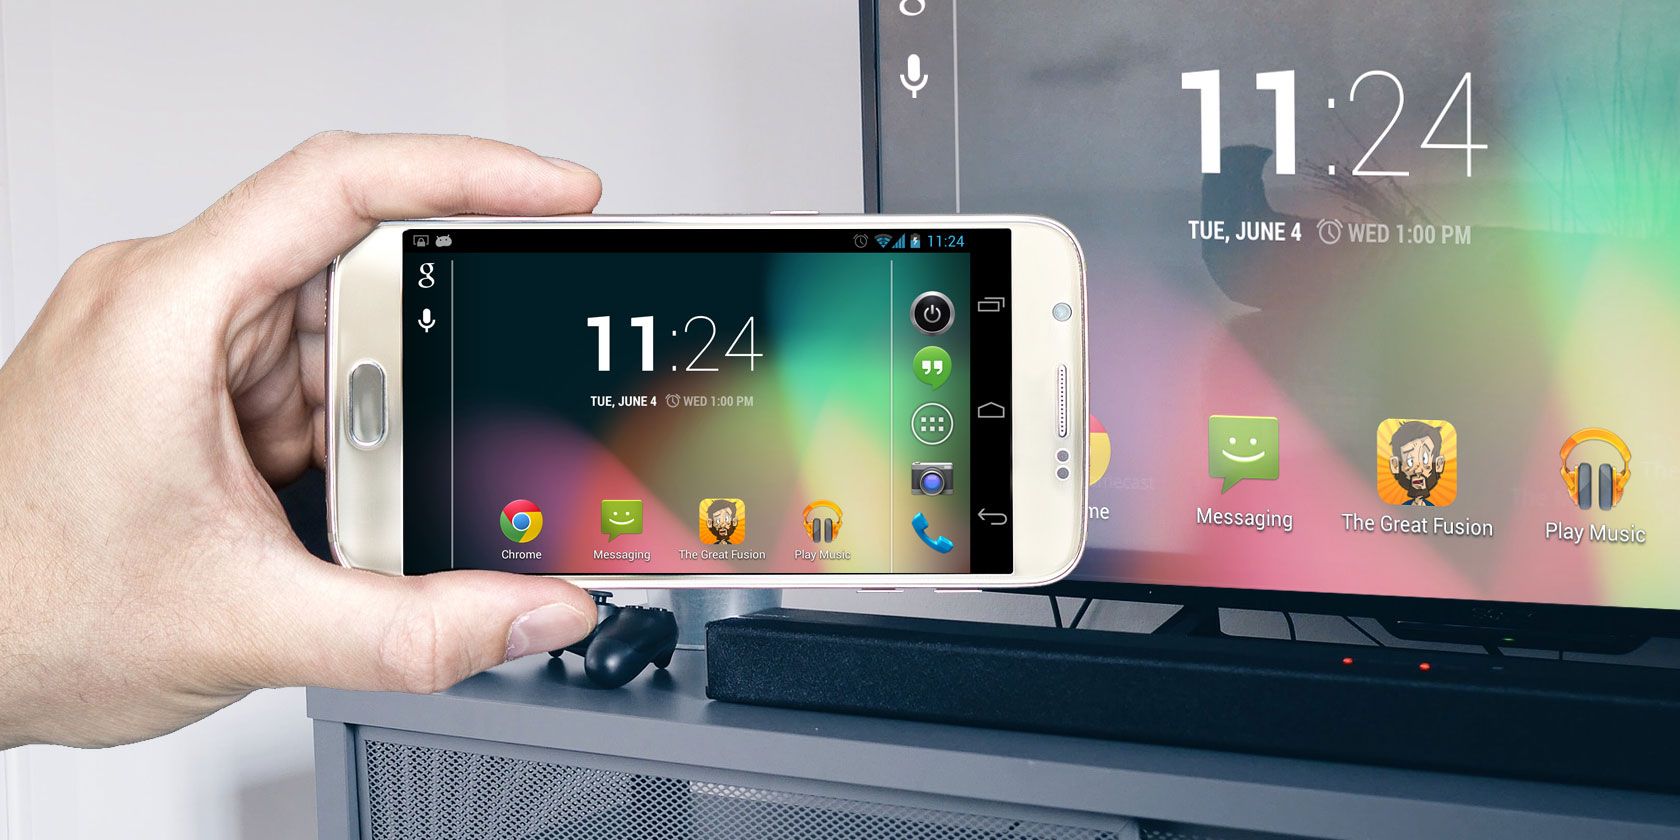 To Mirror Your Android Device Tv, How Do I Mirror My Android Phone To Tv